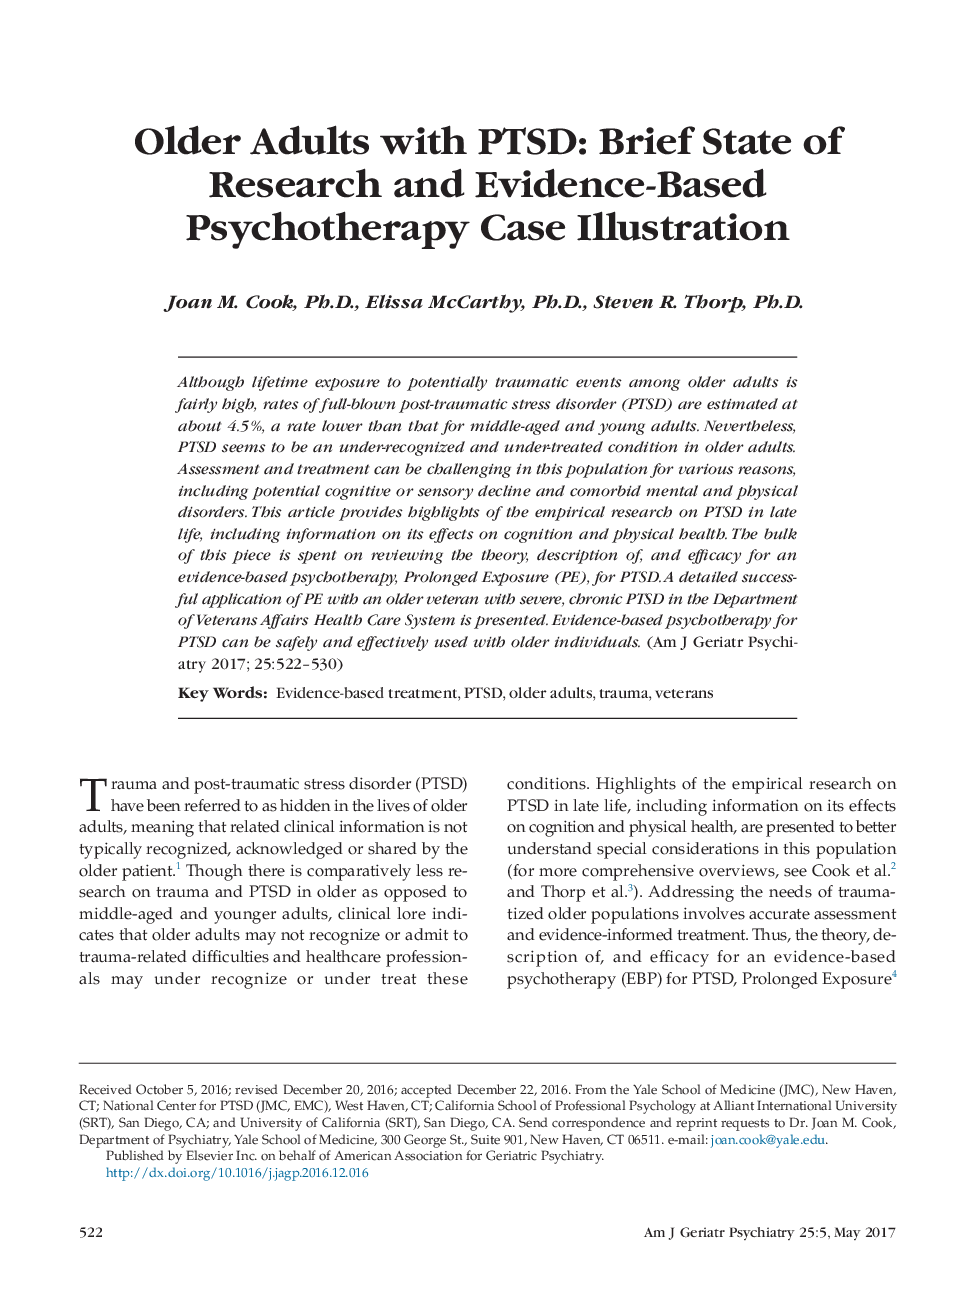 Older Adults with PTSD: Brief State of Research and Evidence-Based Psychotherapy Case Illustration